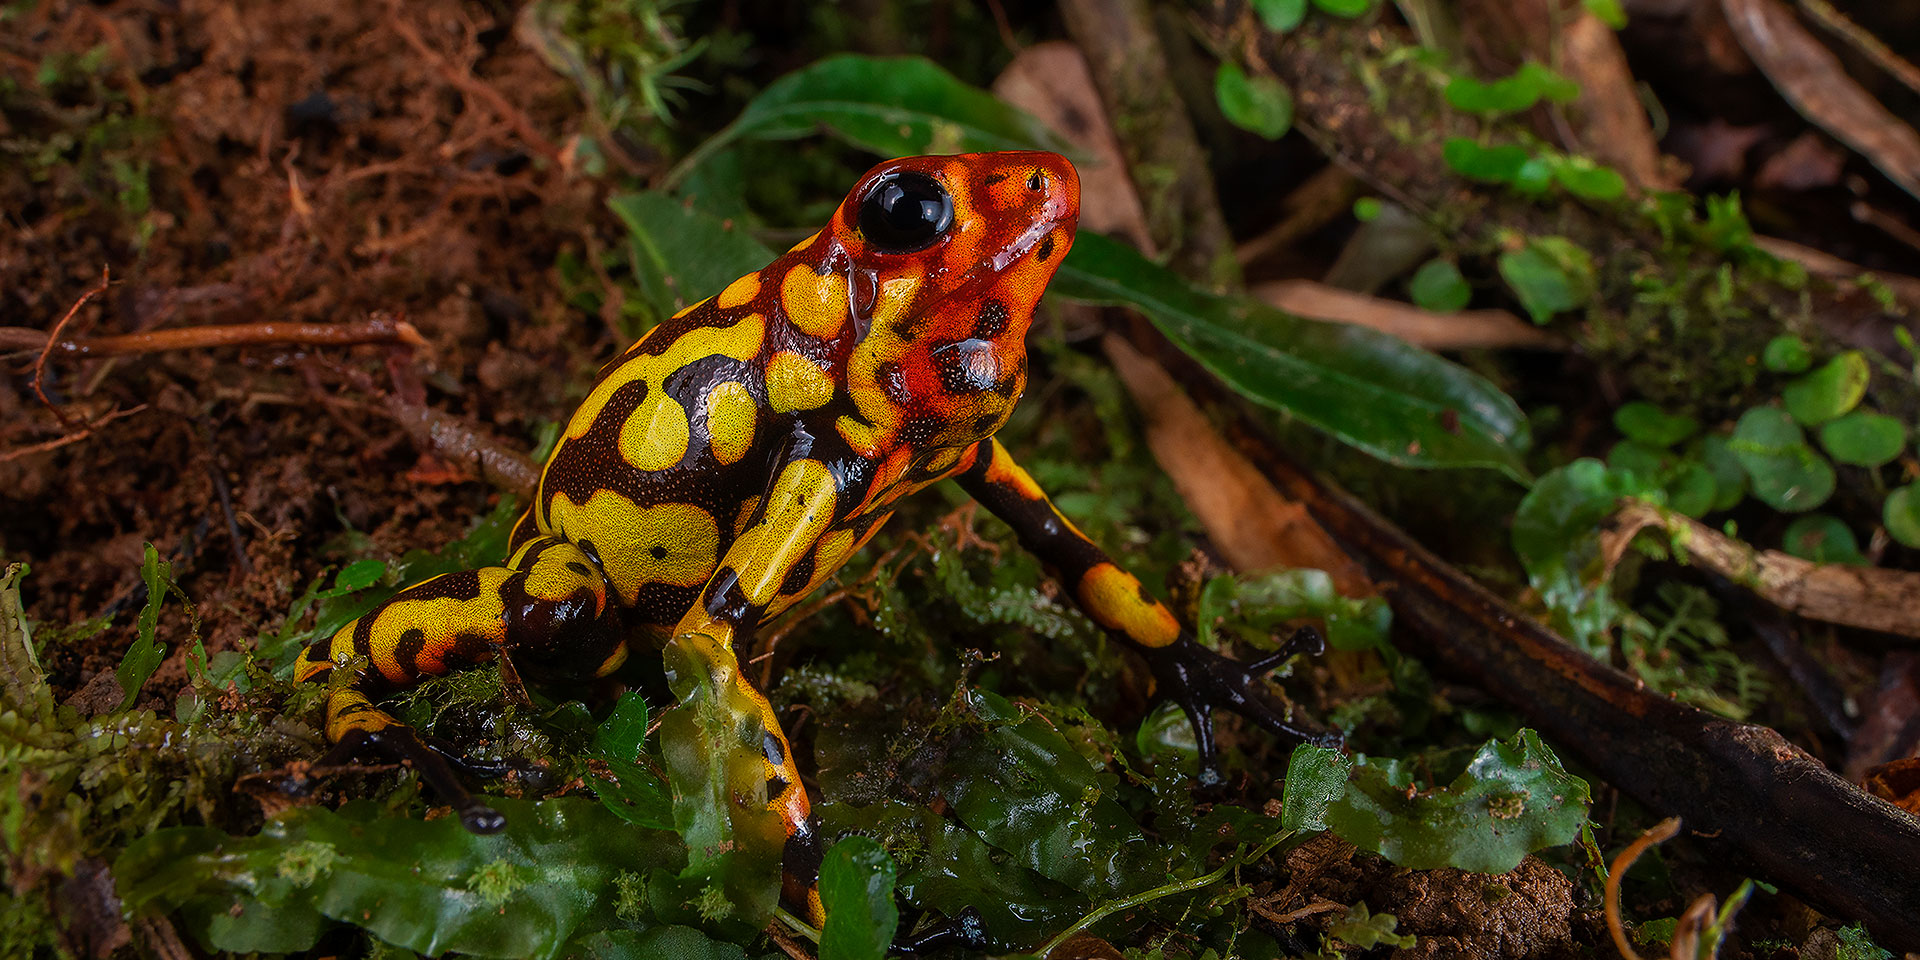 Neoselva-Oophaga-histrionica-anchicayensis-Poison-frog-Colombia-Valle-del-Cauca-Dendrobatidae-Herping-Habitat-Tours-Web